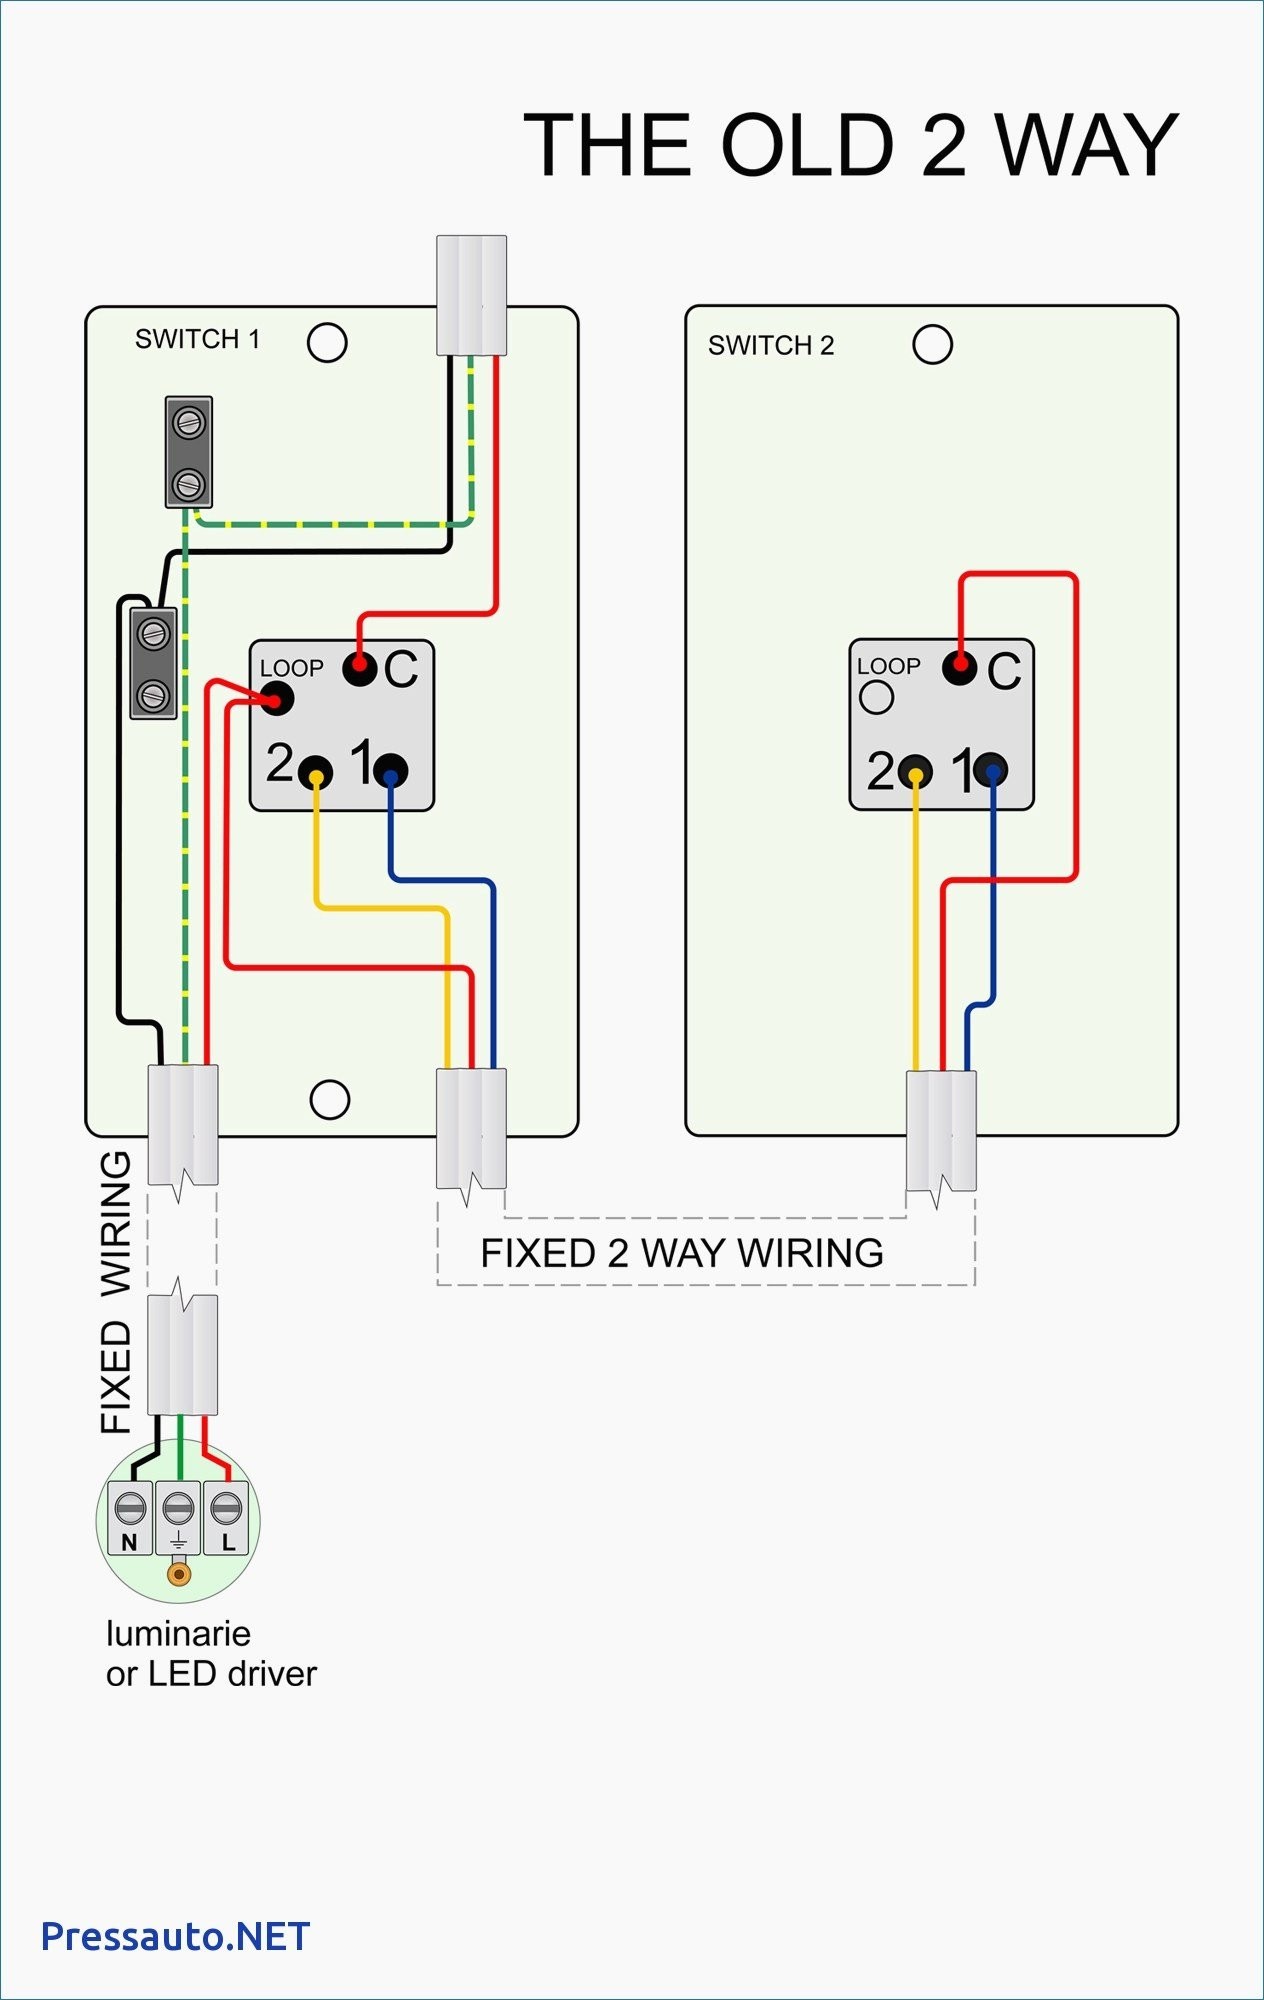 Light Switch Wiring Diagram 2 Switches 2 Lights Simple Fresh Light Switch Wiring Diagram 2 Switches 2 Lights